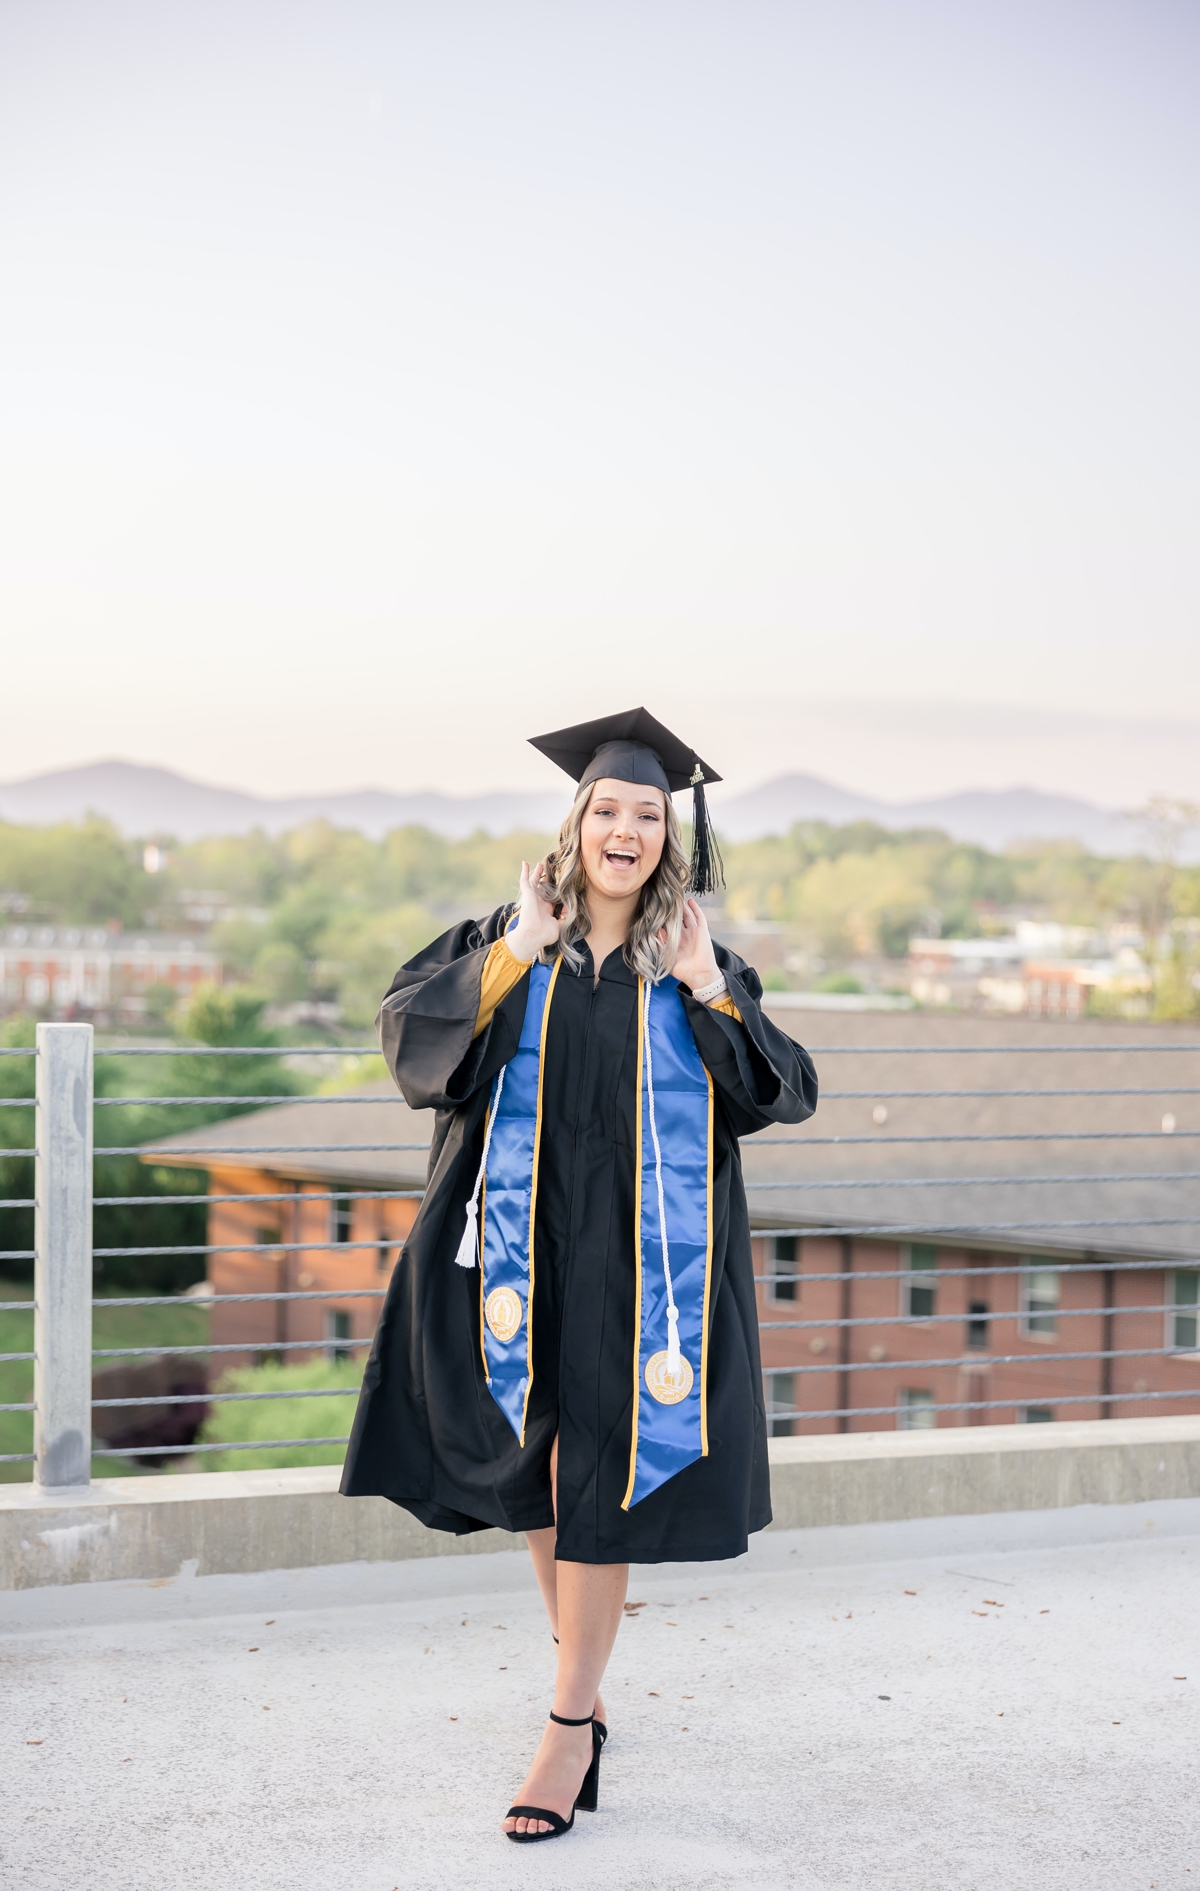 A woman laughing in her cap and gown during her graduation session